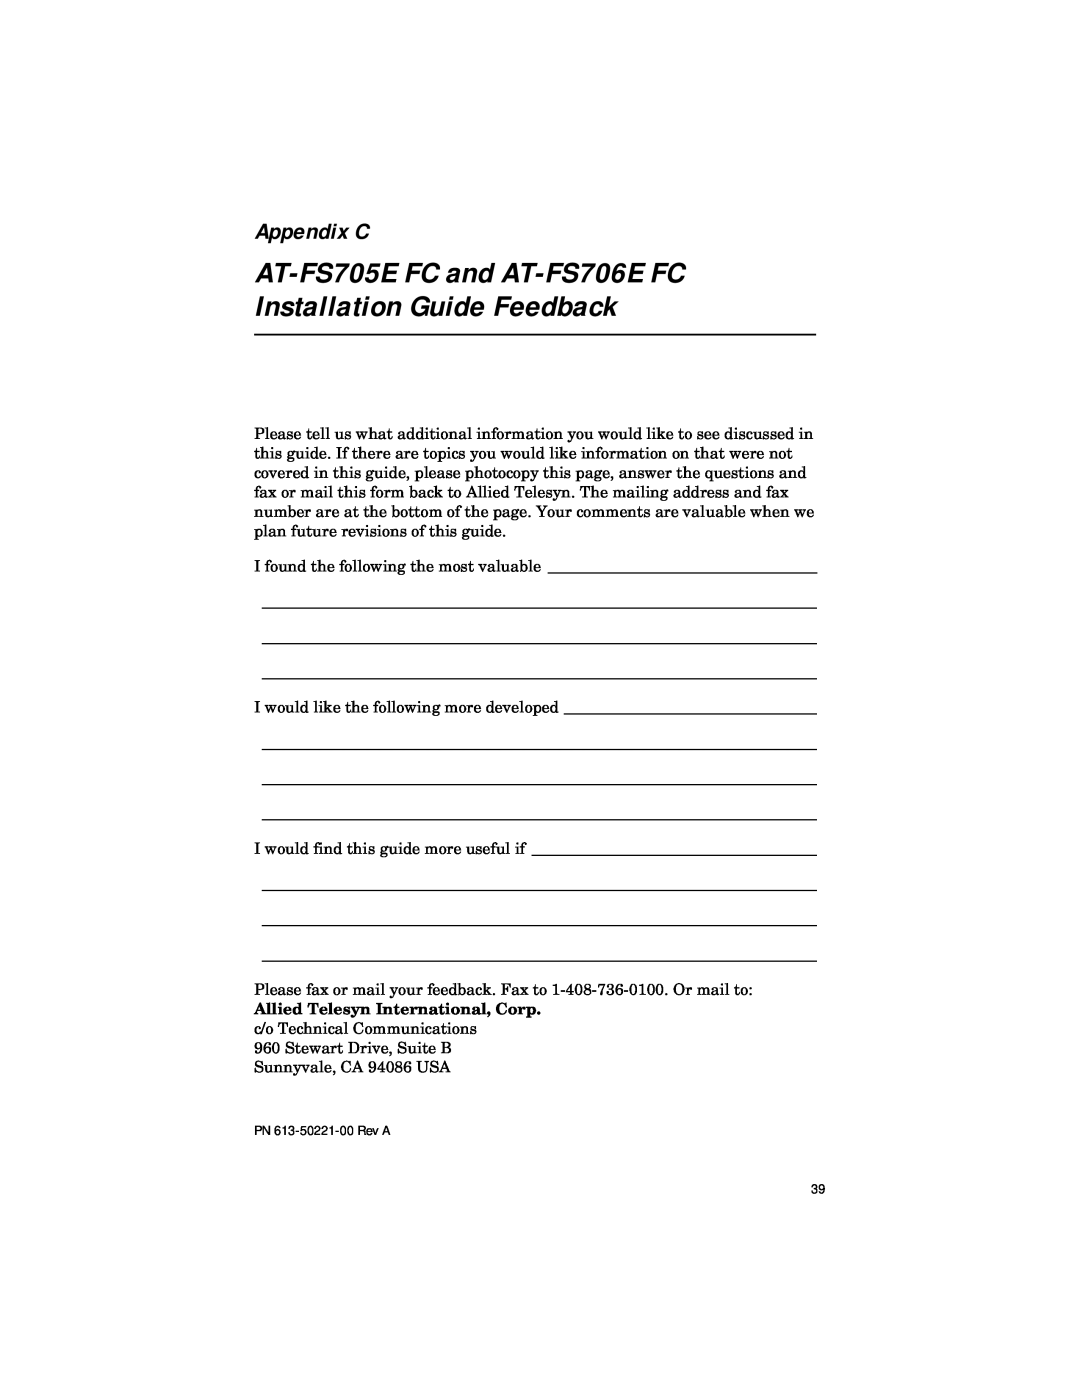 Allied Telesis ATFS705EFCSC60 manual Appendix C, AT-FS705E FC and AT-FS706E FC Installation Guide Feedback 